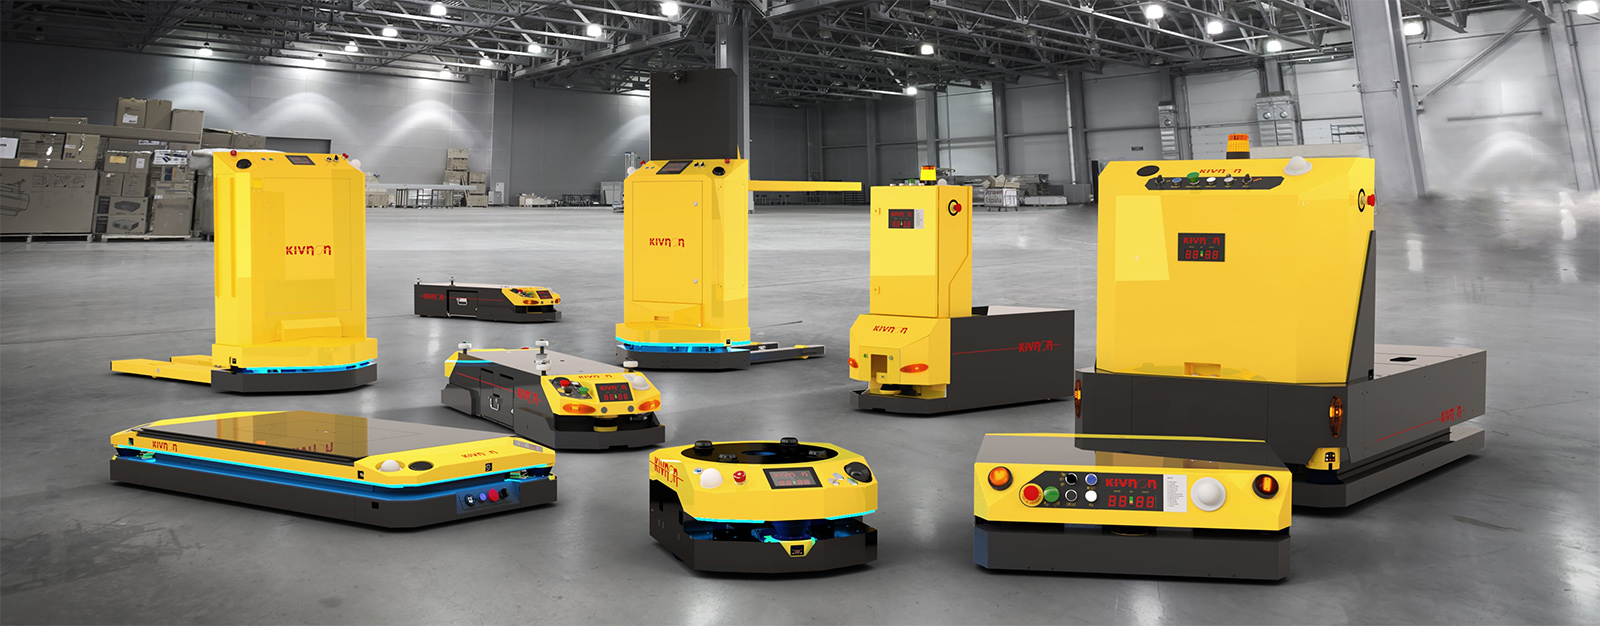 agv robots at toyota manufacturing